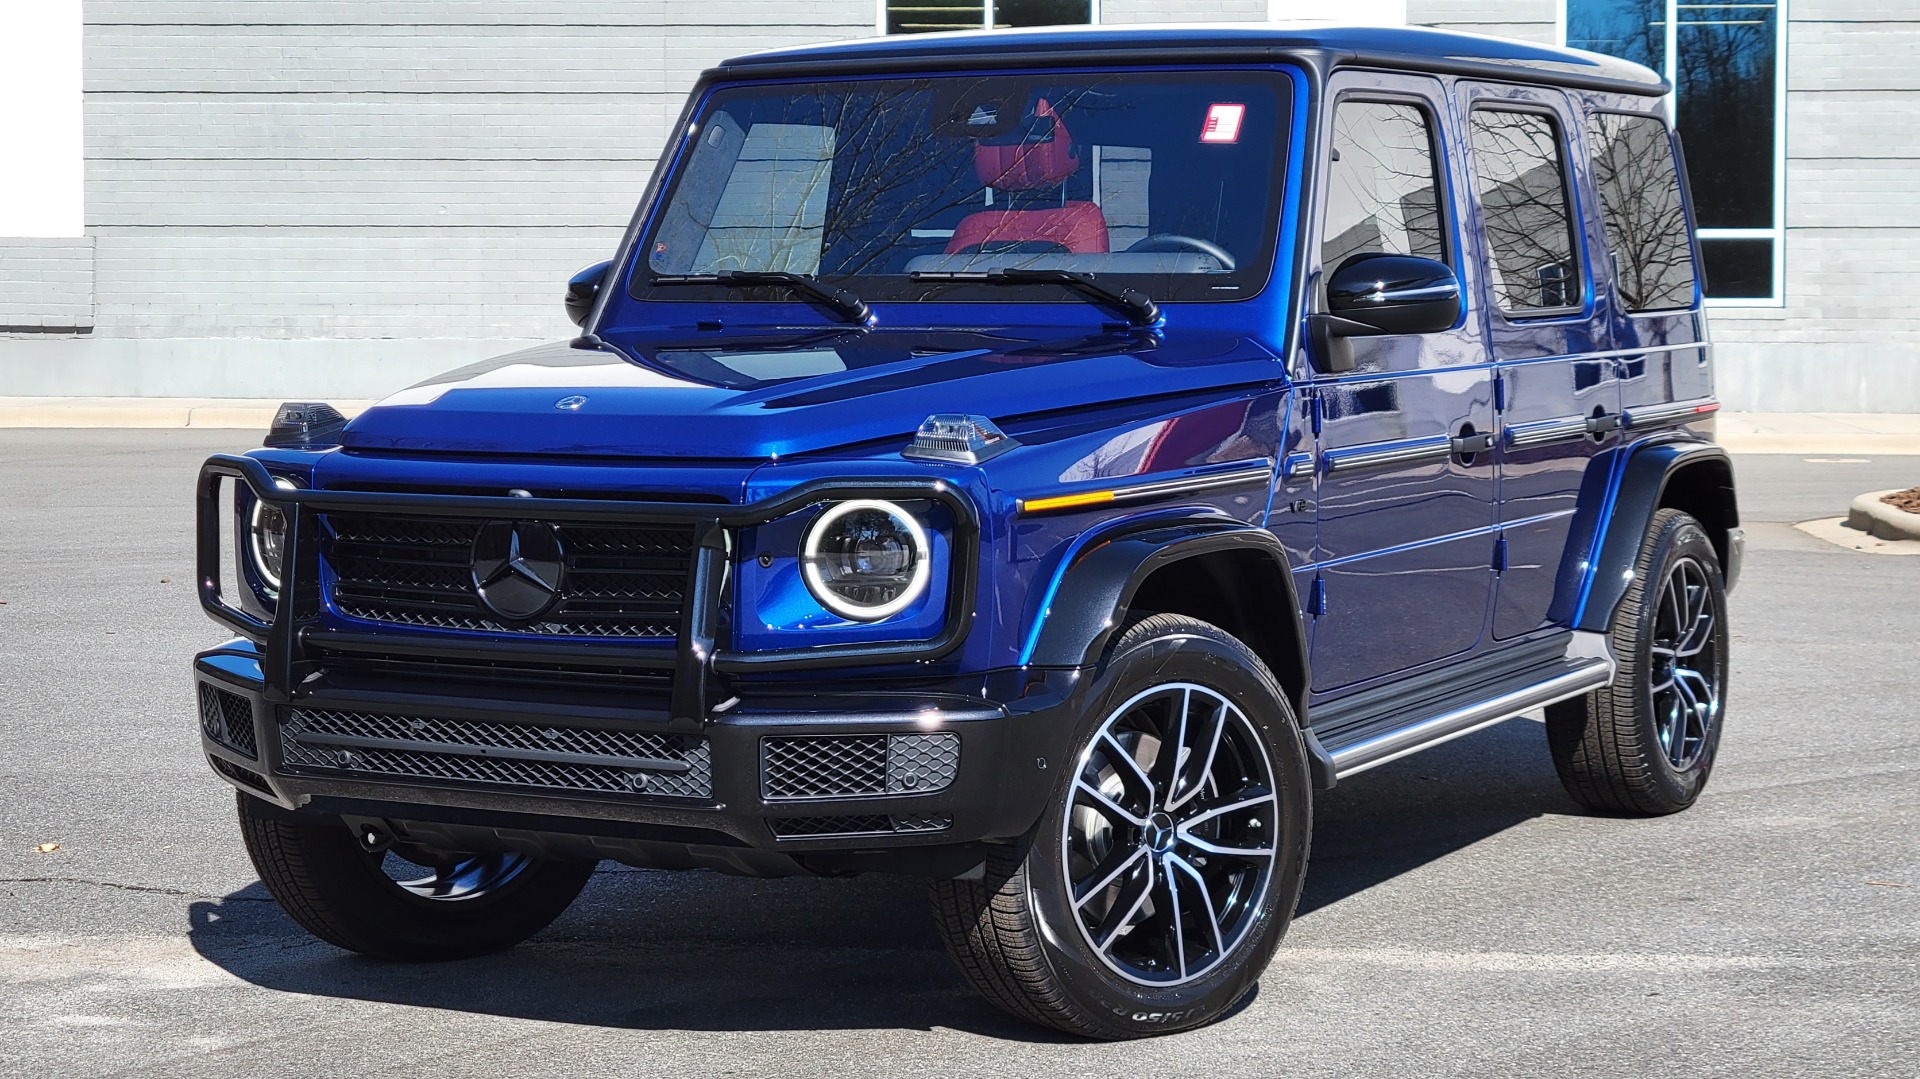 Used 2021 Mercedes-Benz G-CLASS G 550 4MATIC SUV / AMG LINE / EXCLUSIVE INTR / NIGHT PKG PLUS for sale $198,999 at Formula Imports in Charlotte NC 28227 1